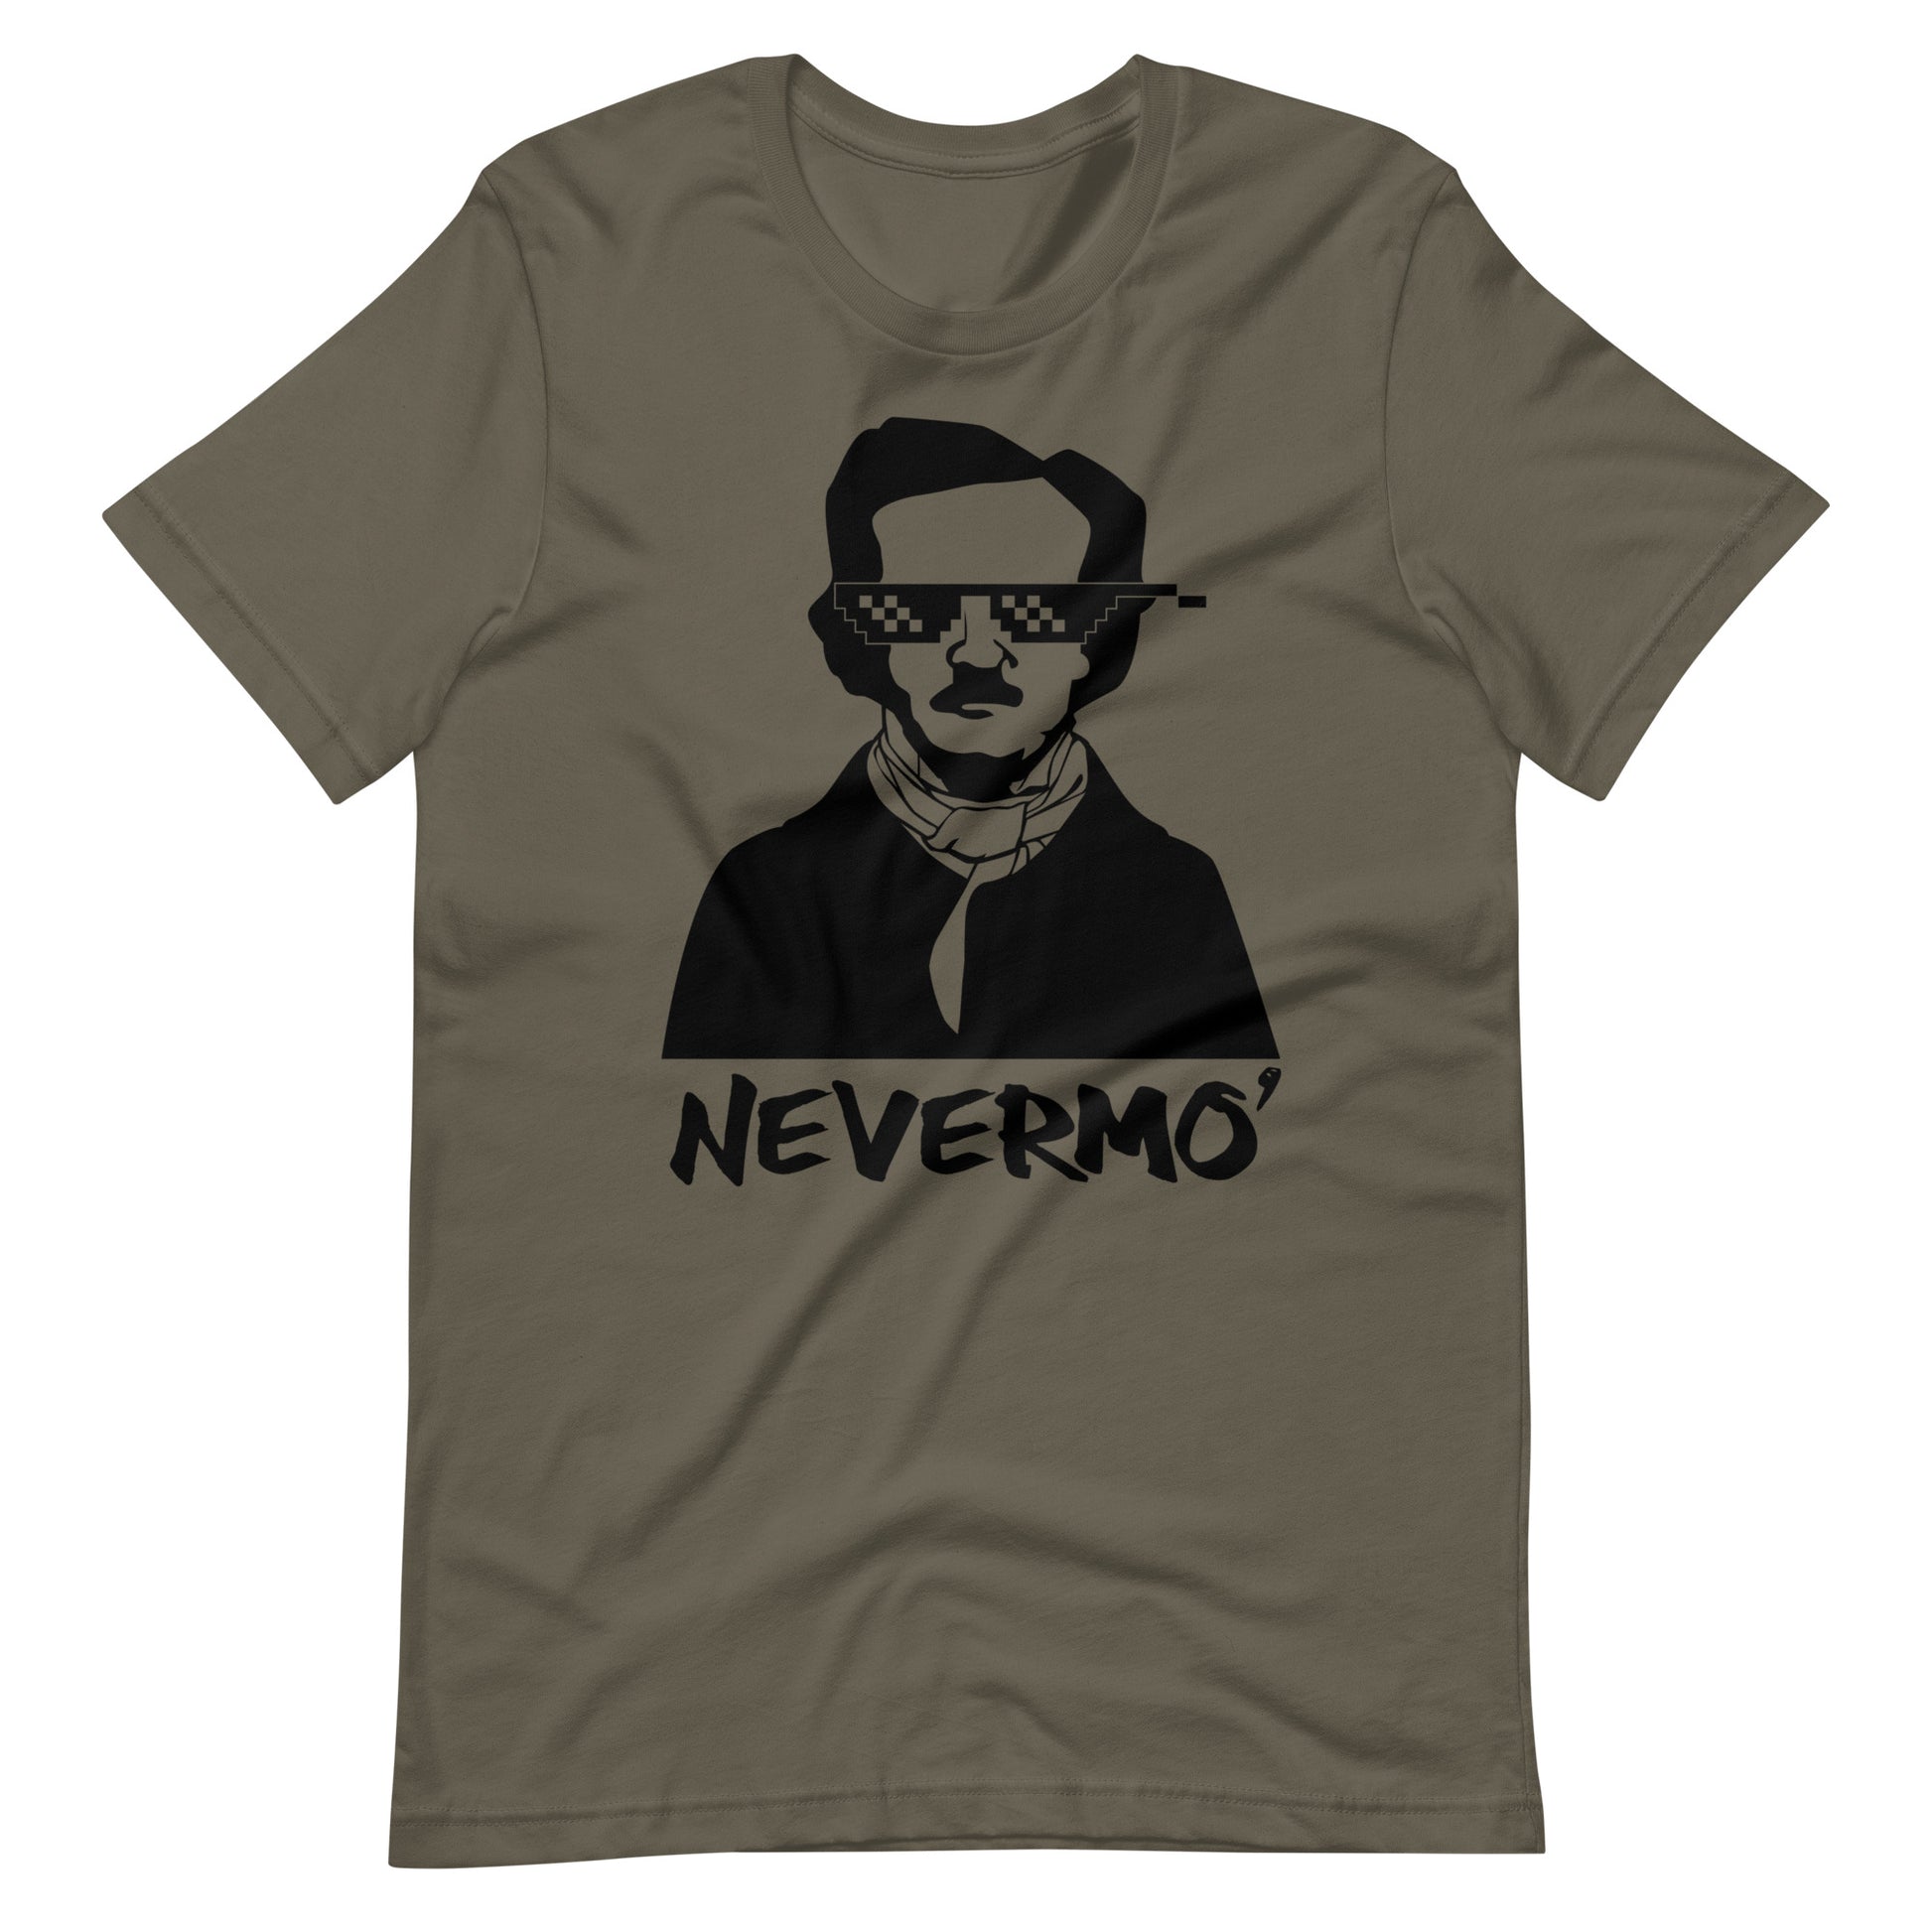 Men's Edgar Allan Poe "The Nevermo" T-Shirt - Army Front